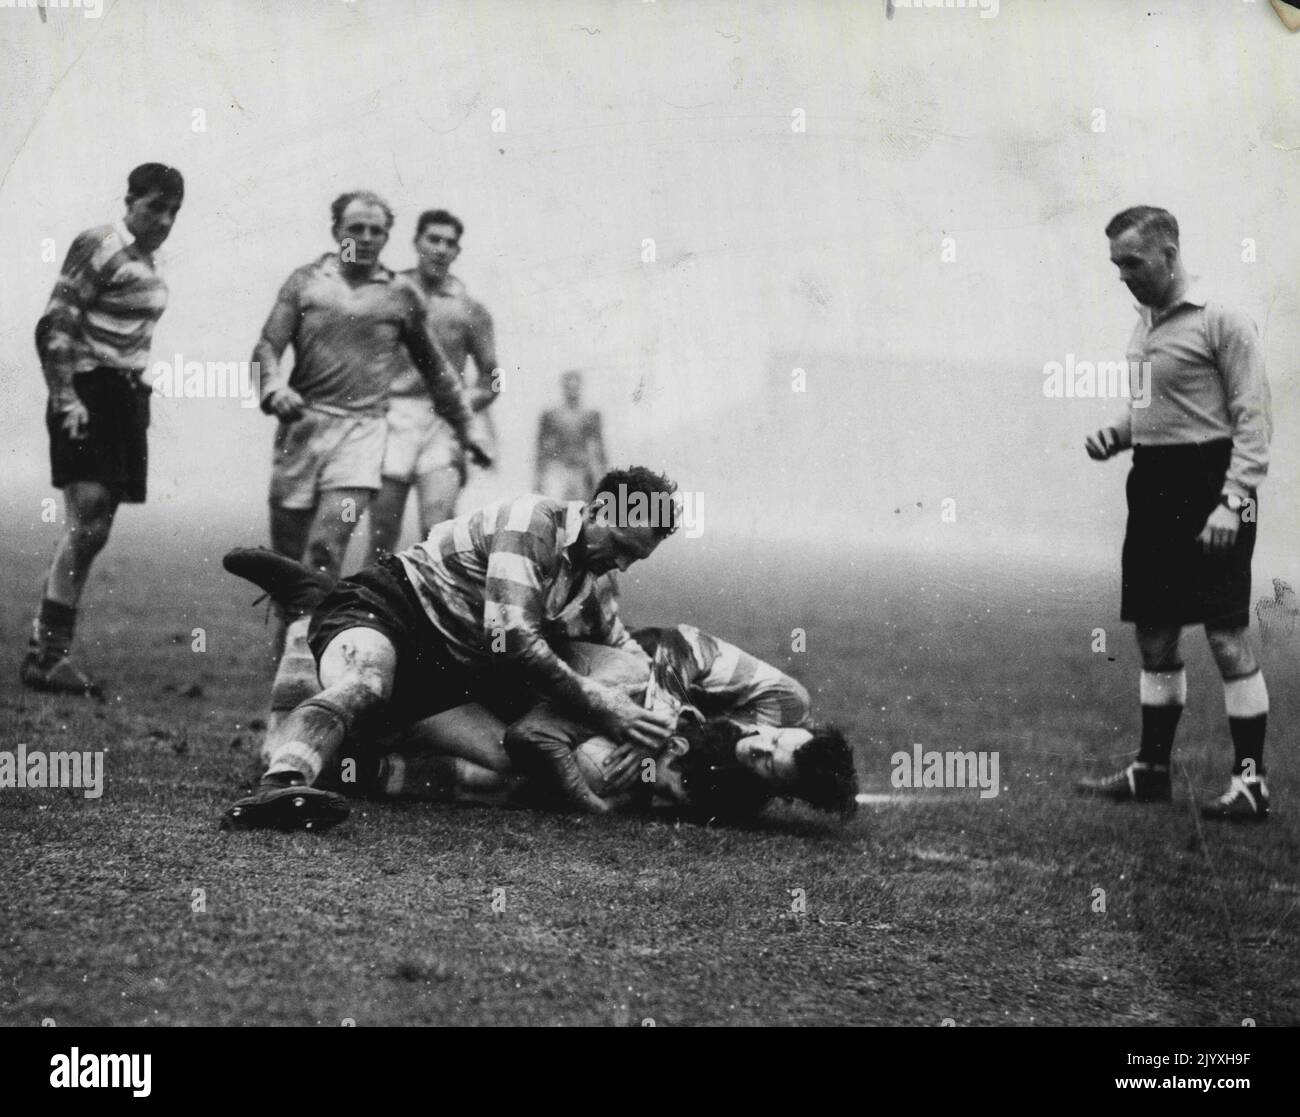 St. Helens v Oldham. Referee Charlie Appleton watches as Keith and Little, Oldham forwards, bring down Karalius, Saints forward. Crash. St. Helens forward Karalius gets no quarter from Oldham forwards Keith and Little in a recent Rugby League match in England. But Karalius made sure he kept possession of the ball. December 24, 1955. Stock Photo